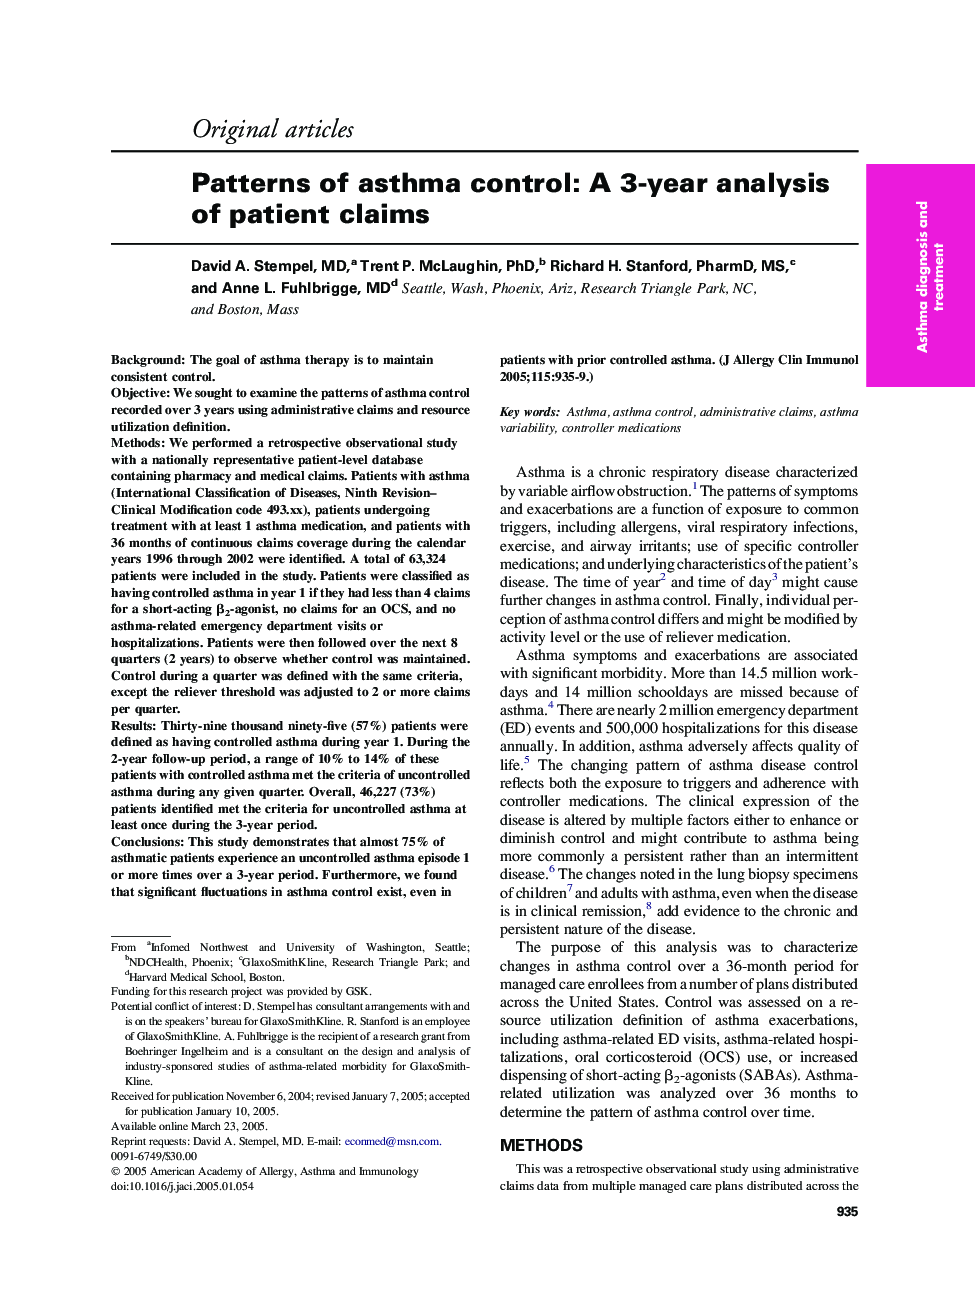 Patterns of asthma control: A 3-year analysis of patient claims